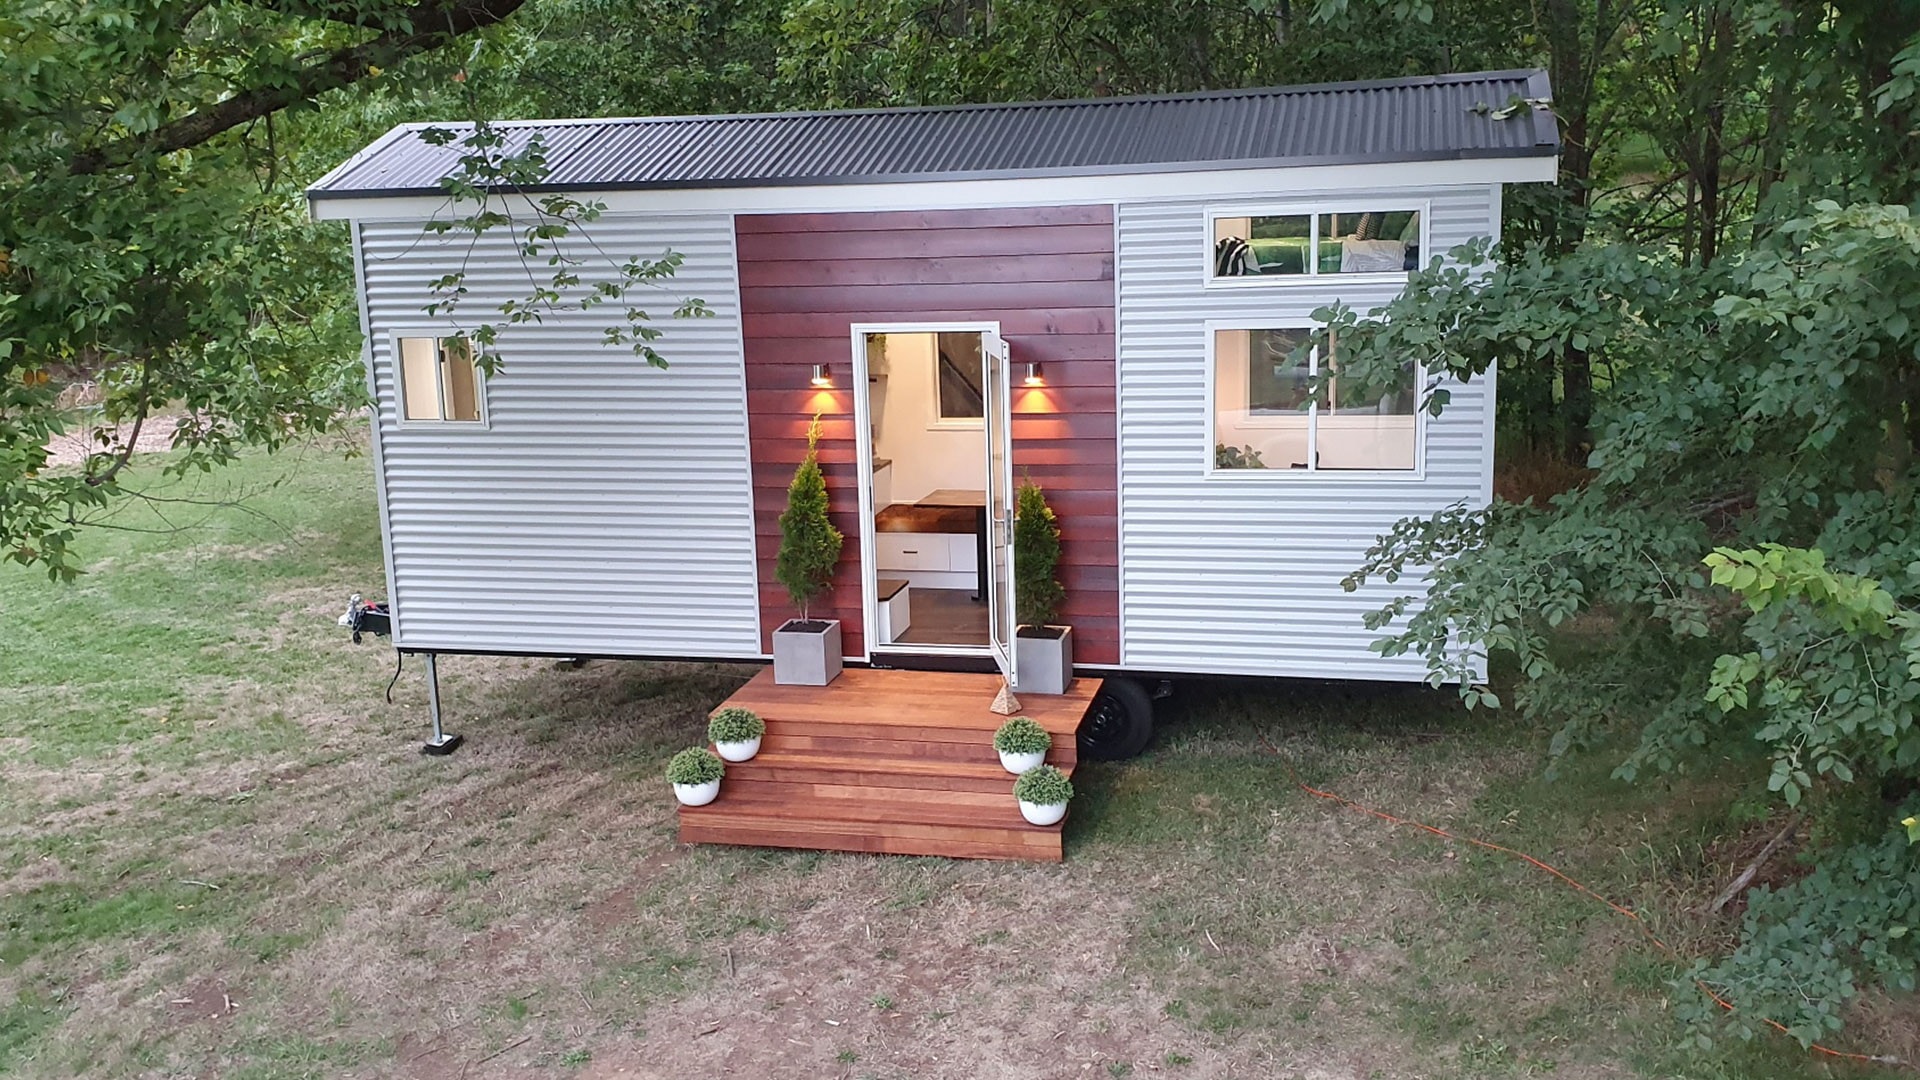 A Clever Layout Makes This Two-Bedroom Tiny Home Extra Flexible And Cozy